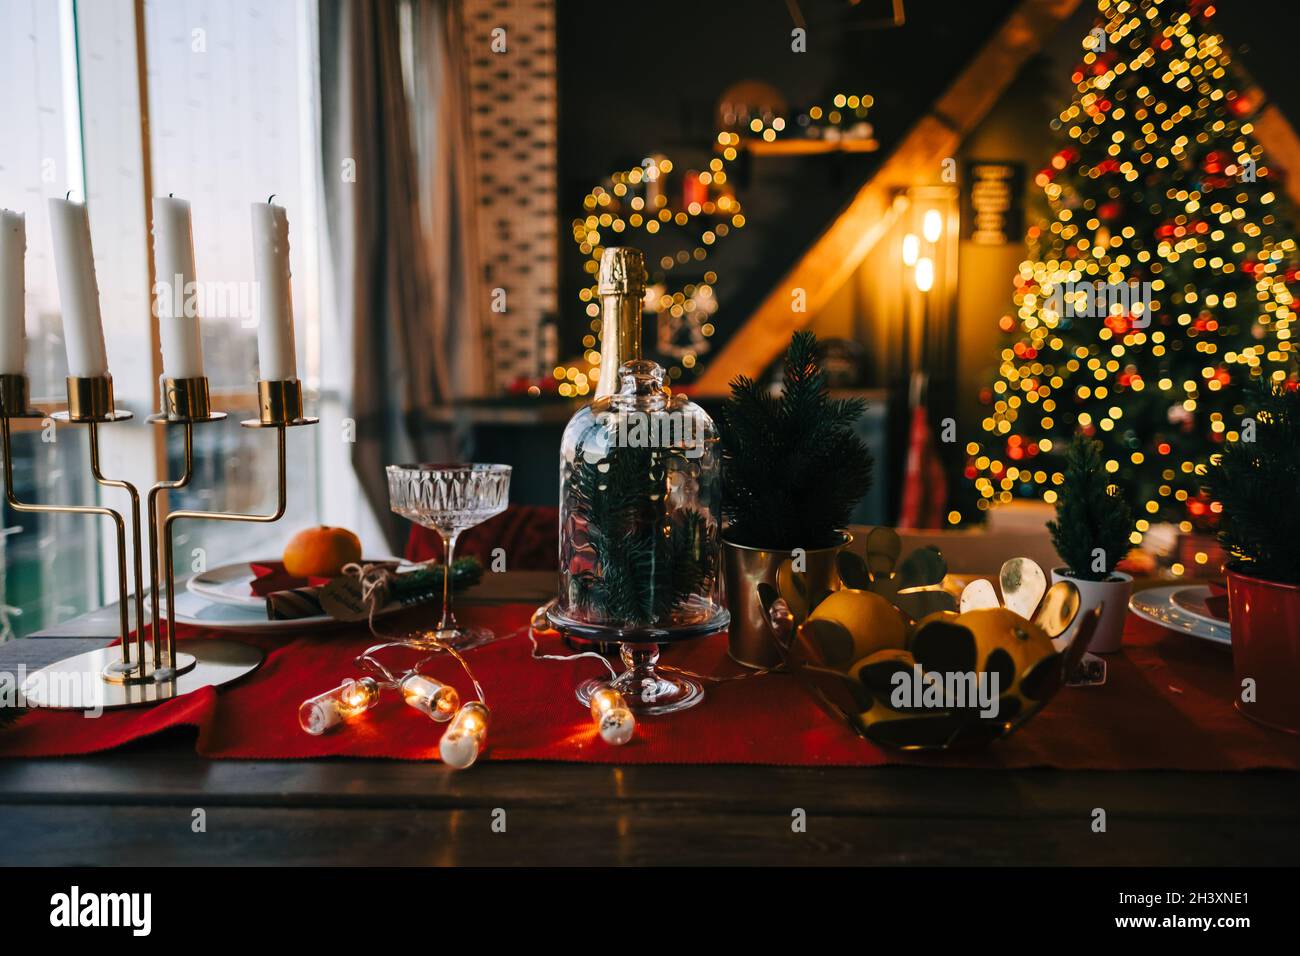 Festive Christmas table in the kitchen with a big Christmas tree and decorations. Stock Photo